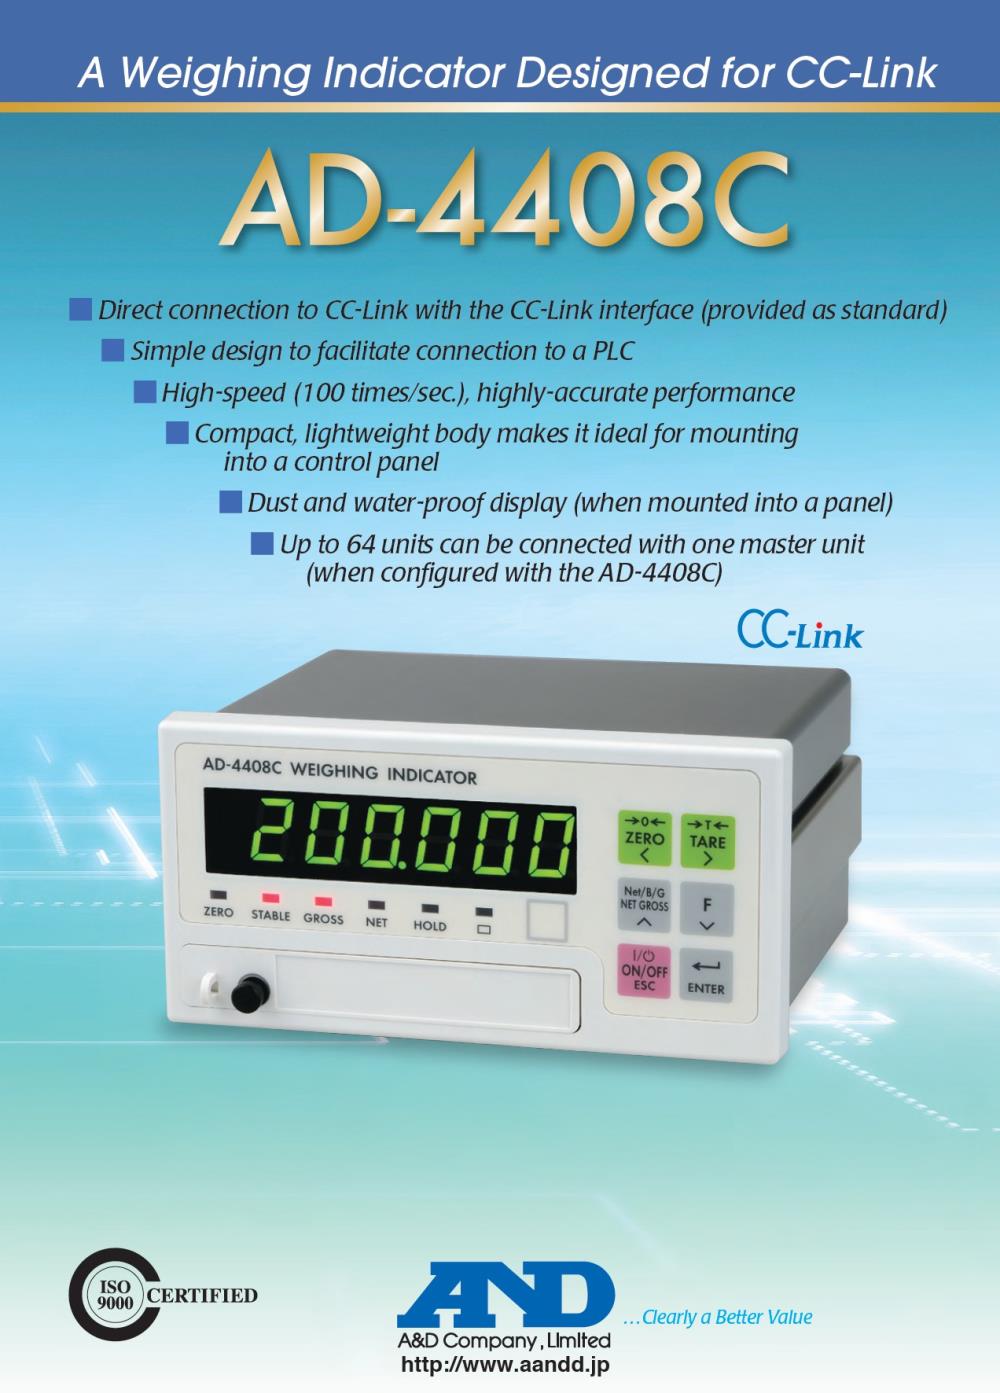 Weighing Indicator, Brand: A&D (AND), Model: AD-4408C